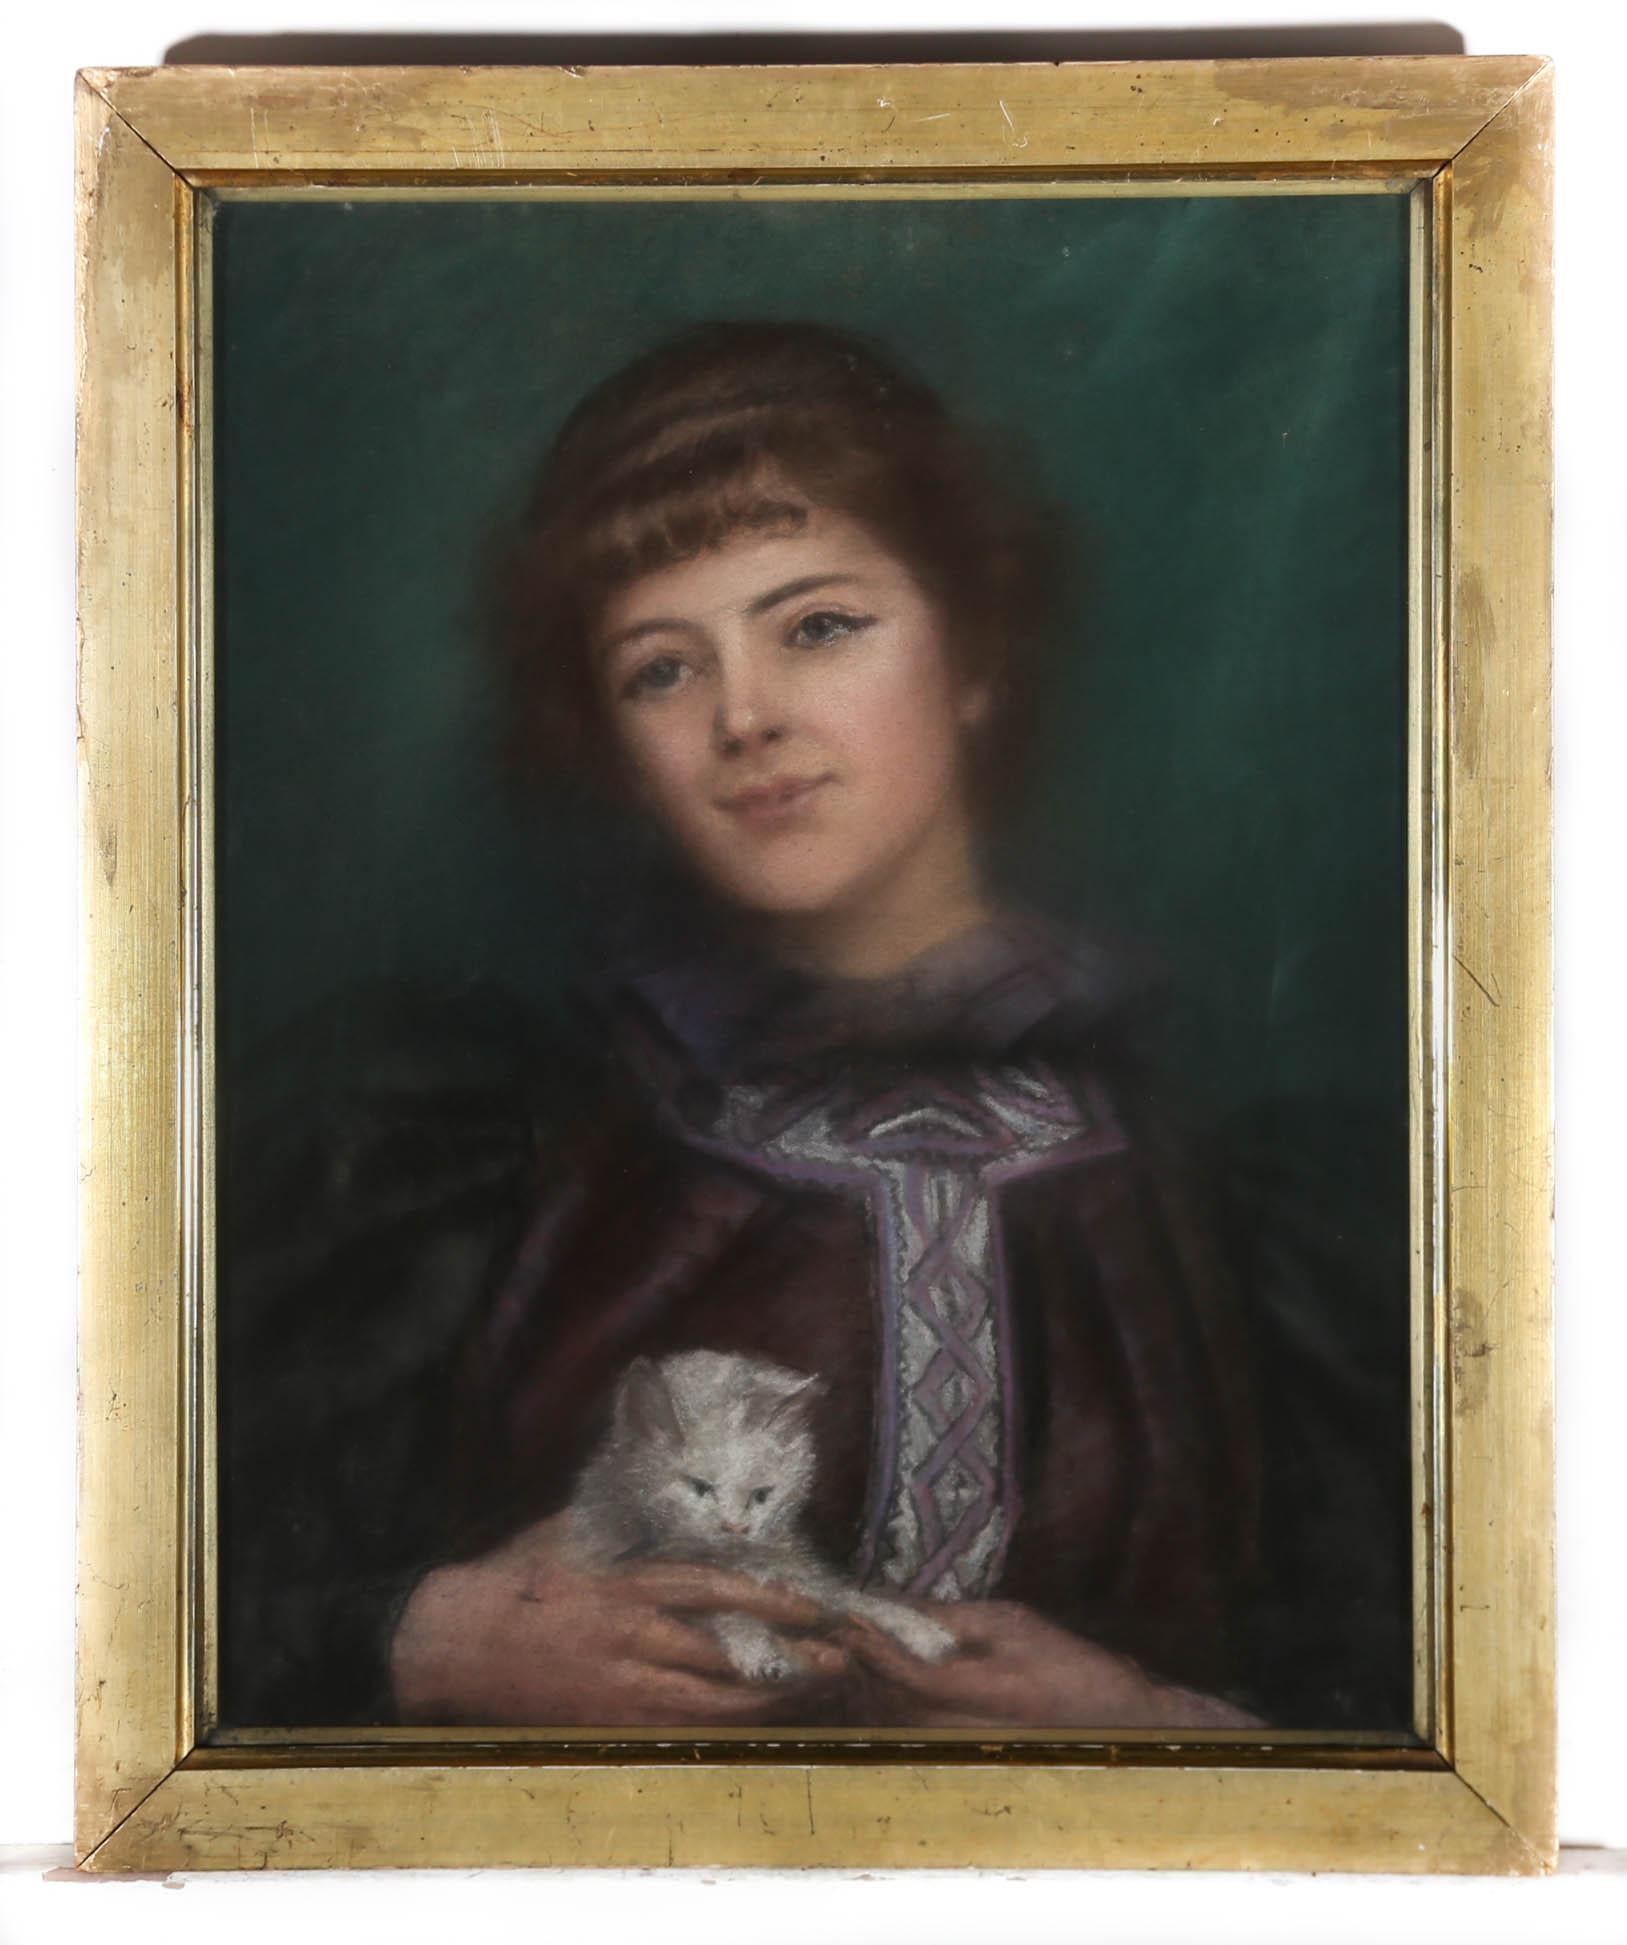 A fine 19th Century pastel portrait, showing a pretty, smiling young woman, proudly holding a tiny white kitten. The subject and soft rendering of the portrait, give this piece a tenderness and delicacy. The drawing is unsigned and presented in its